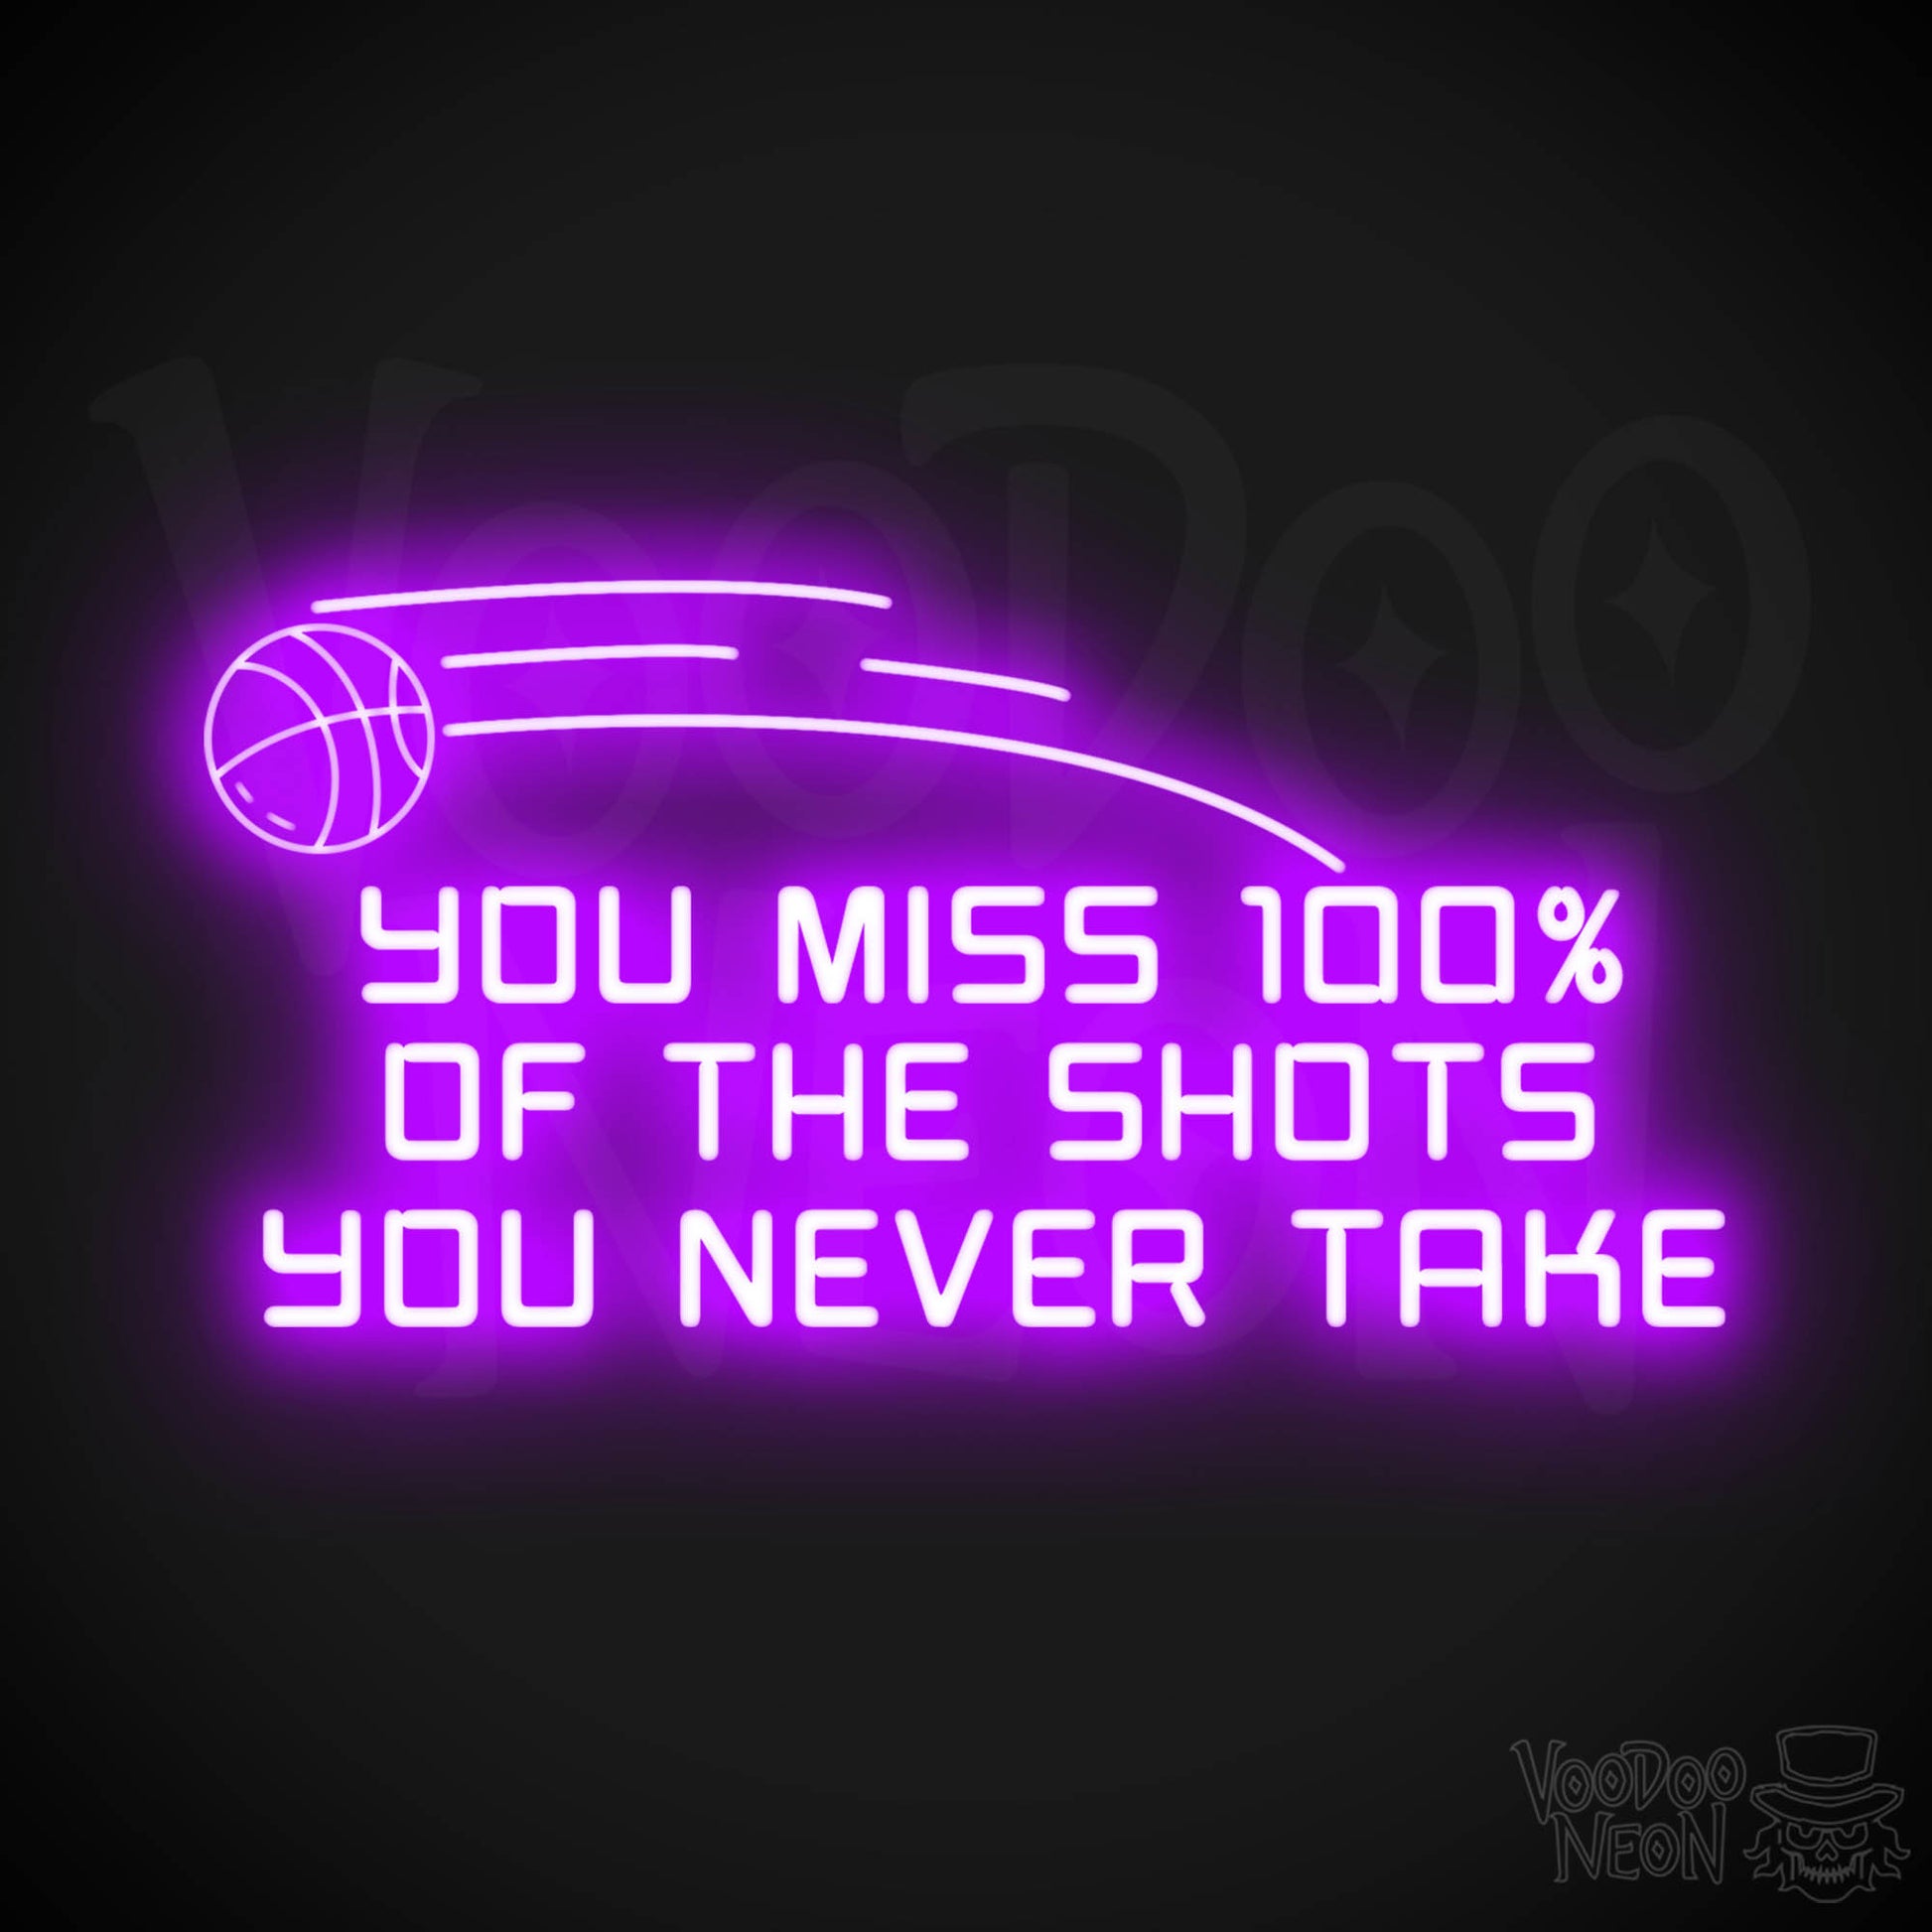 You Miss 100% of the Shots You Never Take Neon Sign - Neon Wall Art - Inspirational Signs - Color Purple